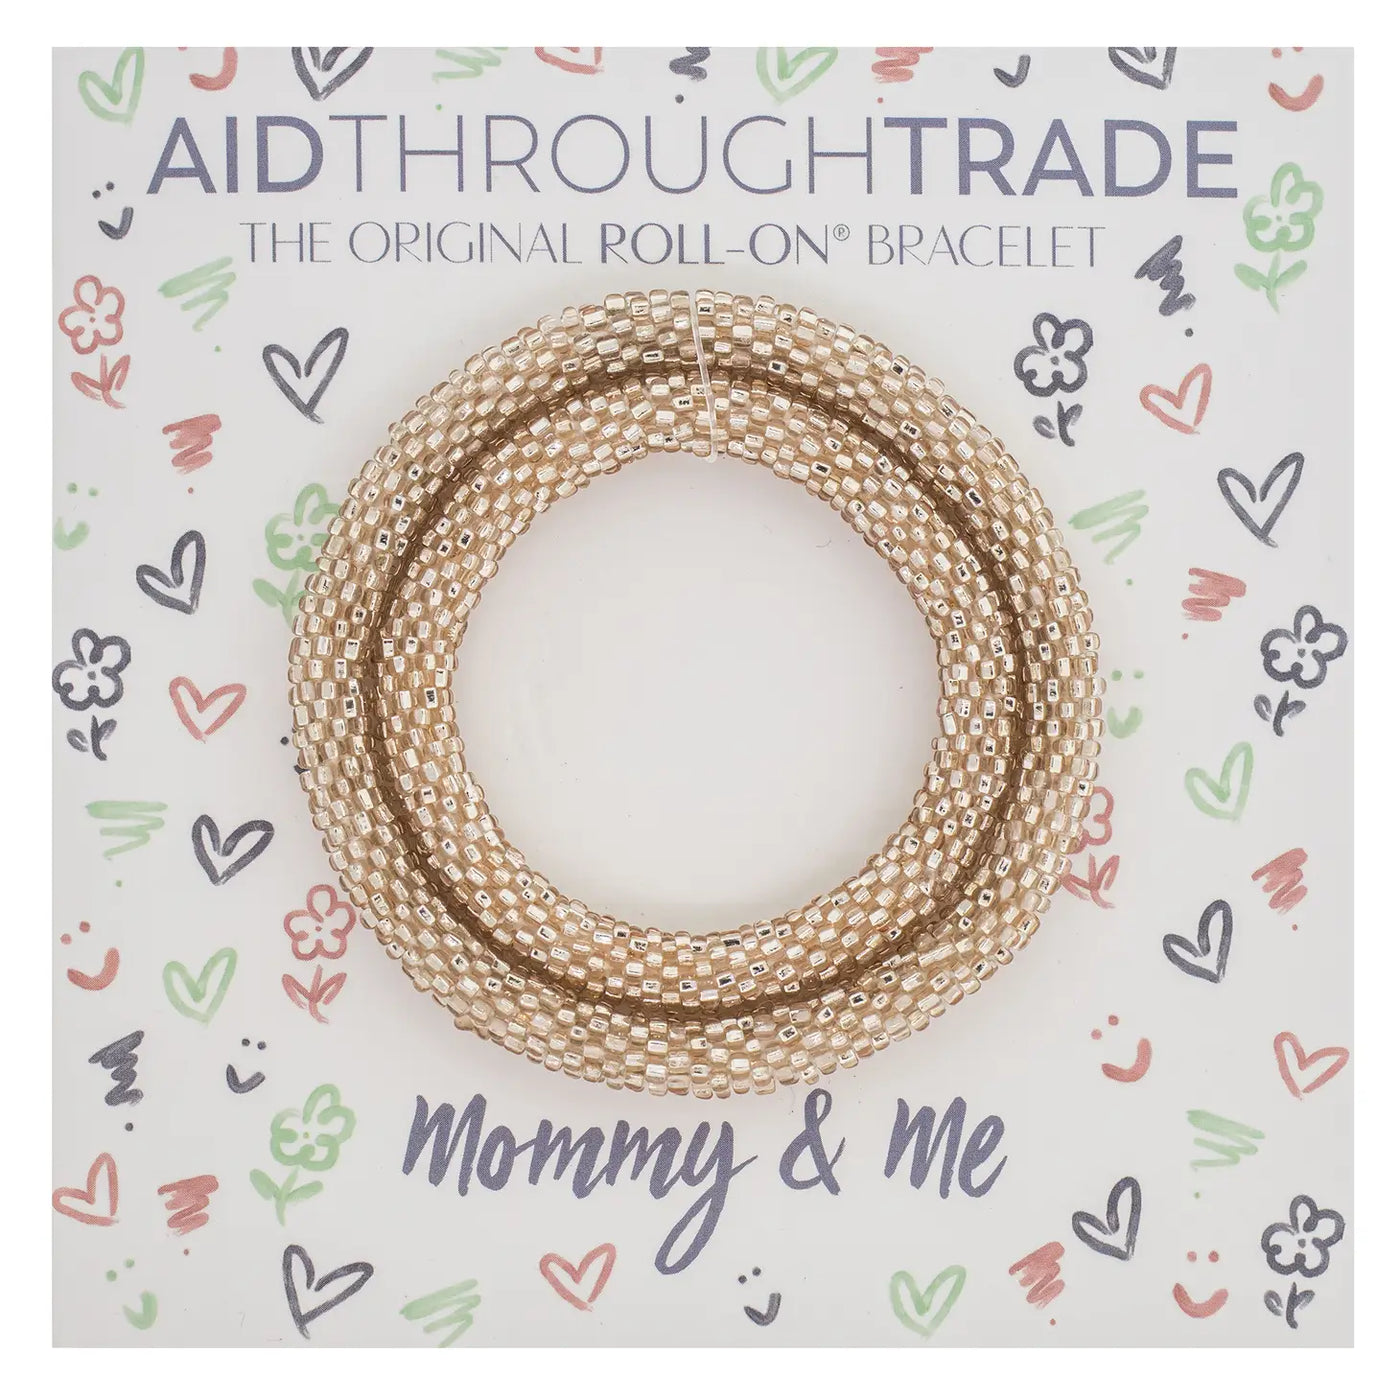 Aid Through Trade Mommy & Me Roll-On Bracelets - Simple Good